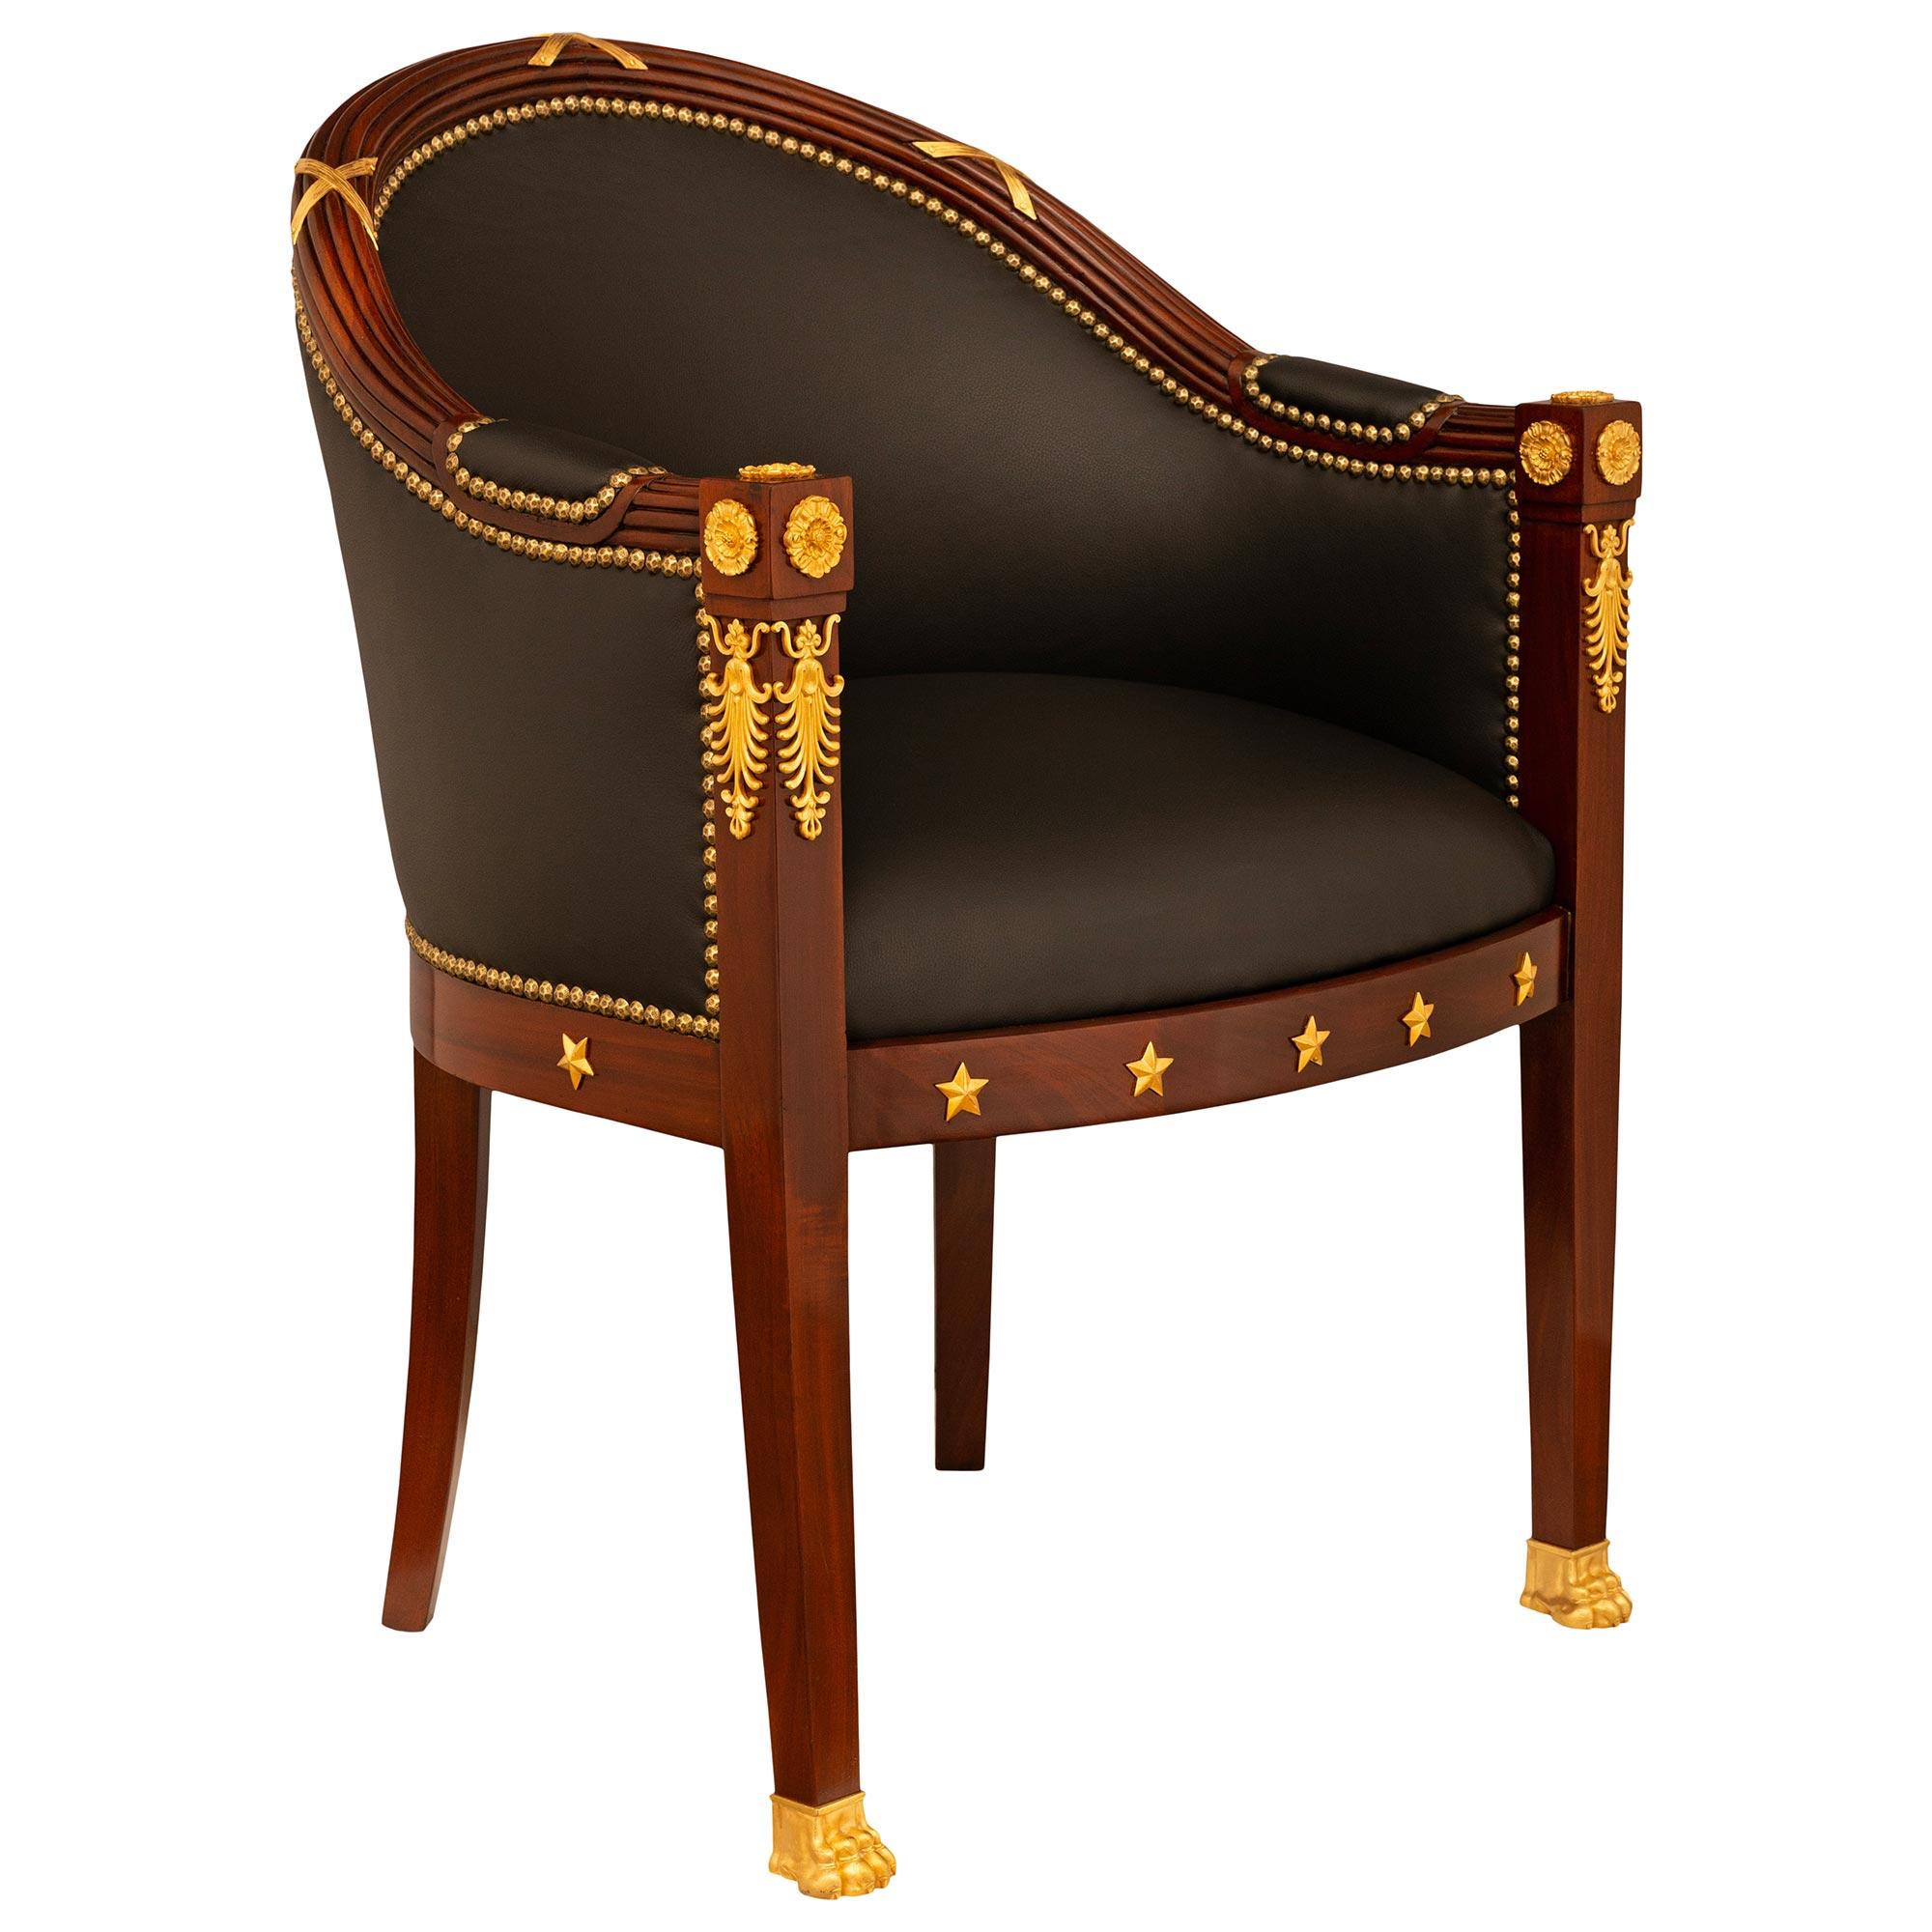 A handsome and finely detailed pair of French 19th century Empire st. Mahogany and Ormolu armchairs. The armchairs are raised by four square and gently curved legs with Ormolu pawed feet on the front legs. The straight front apron has five Ormolu